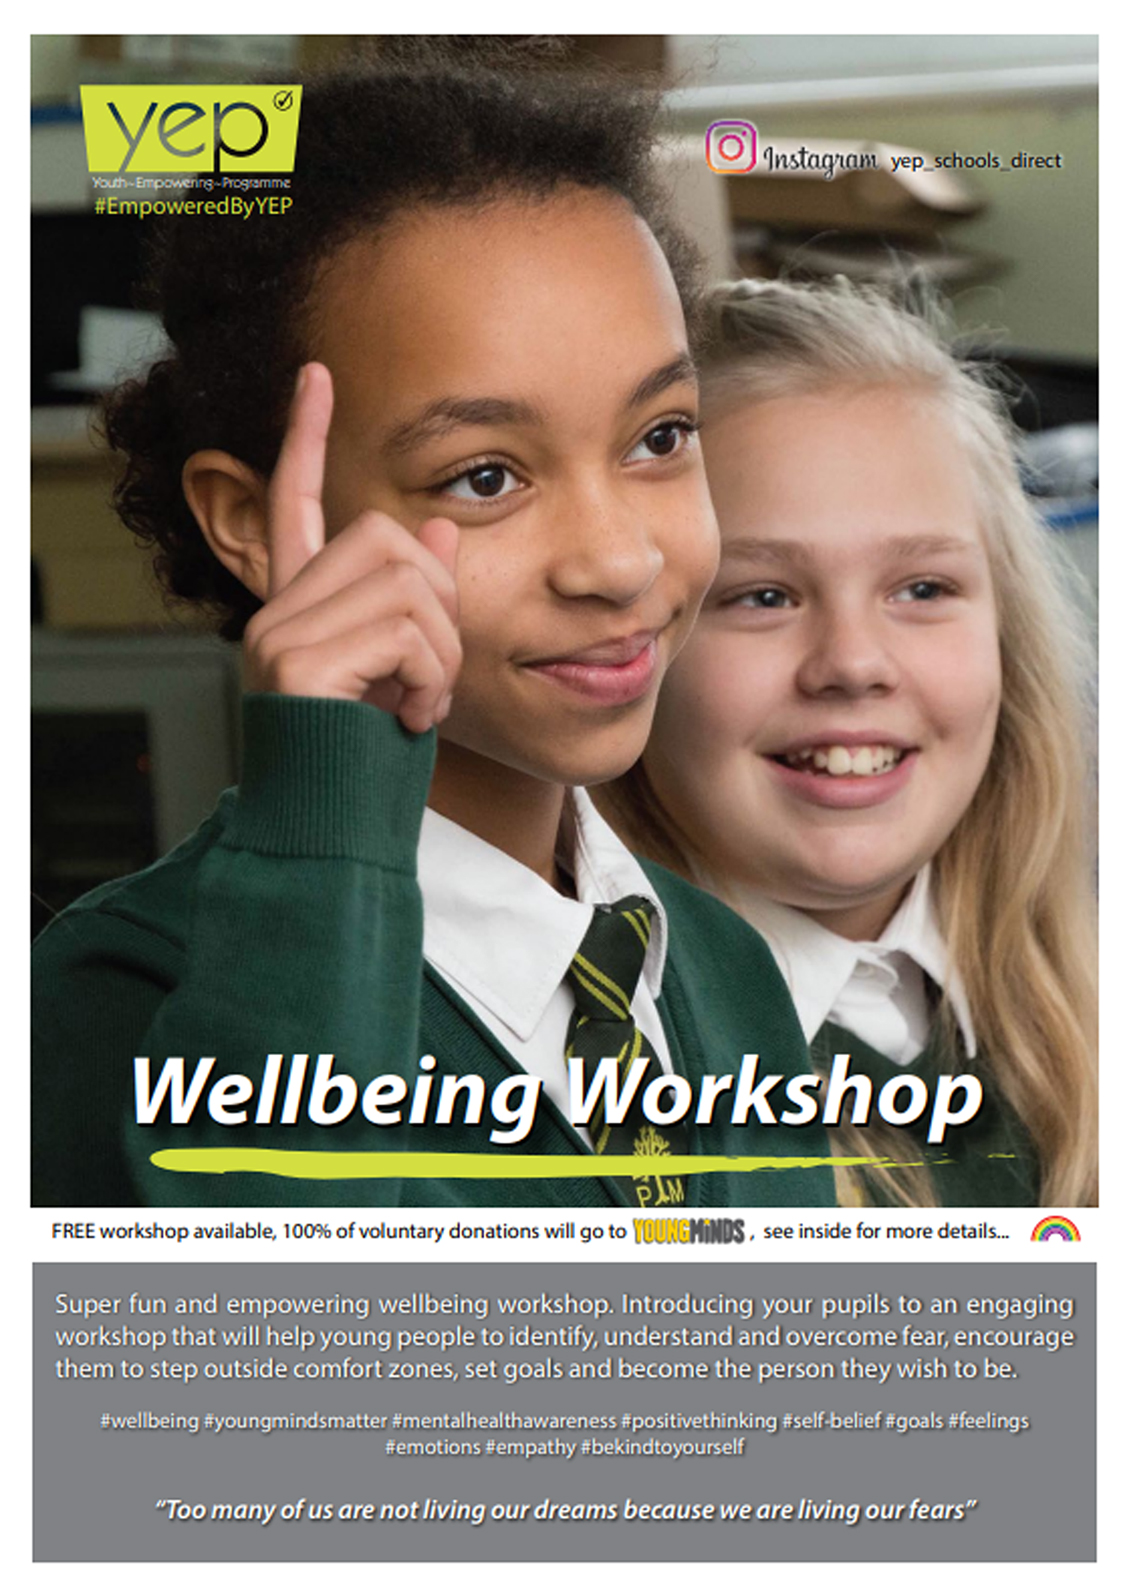 Wellbeing, image showing information about the workshop